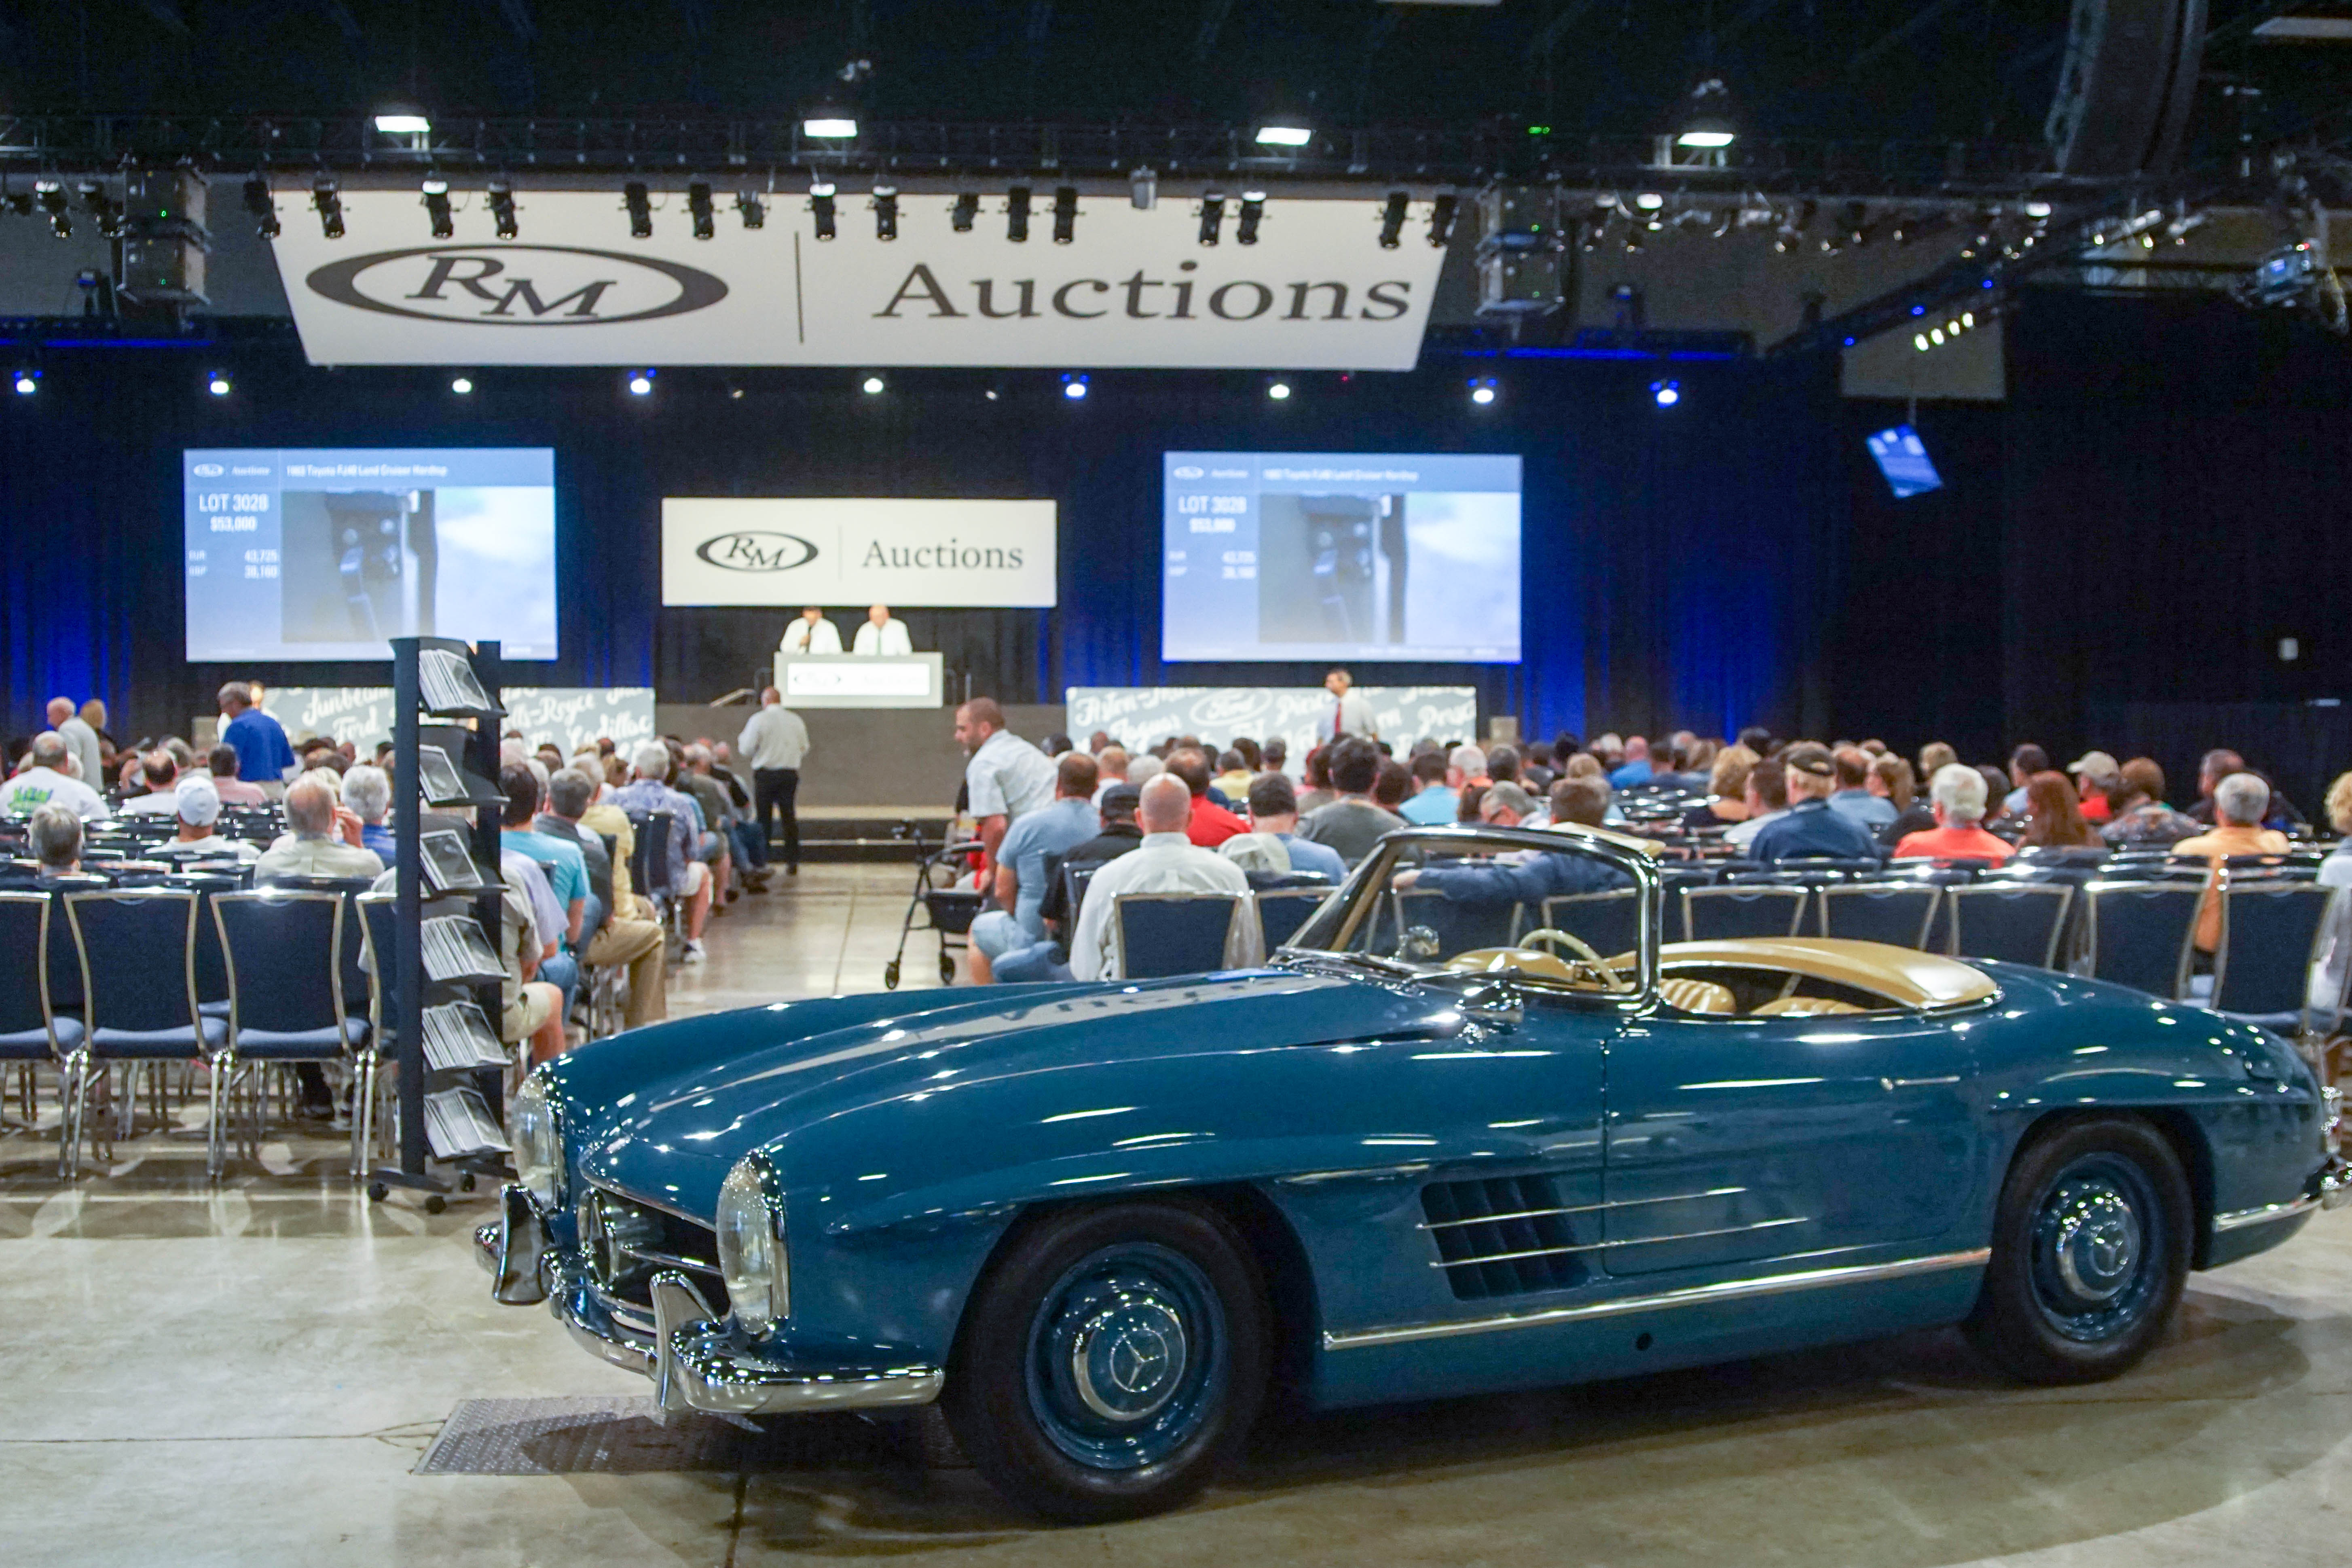 Fort Lauderdale, Banner sale: Fort Lauderdale auction gets boost from RM, ClassicCars.com Journal